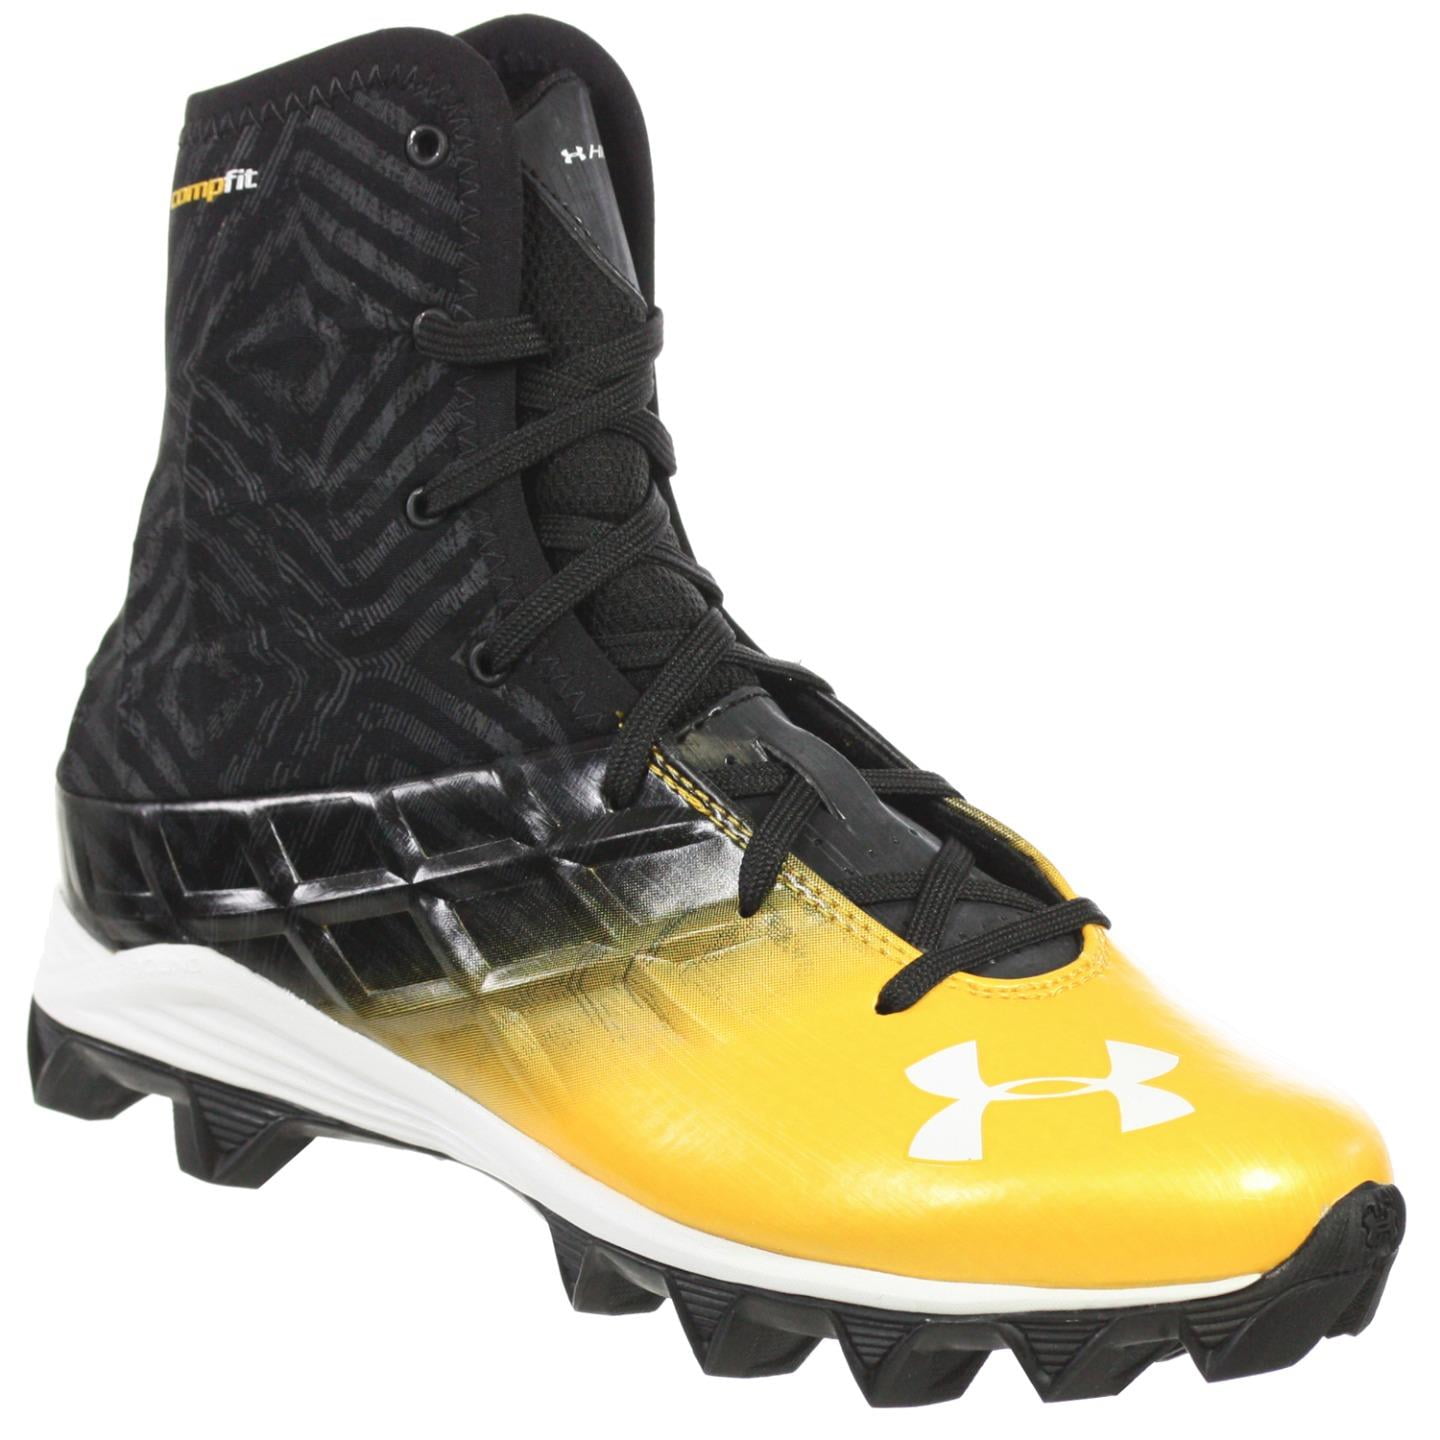 under armour youth highlight cleats